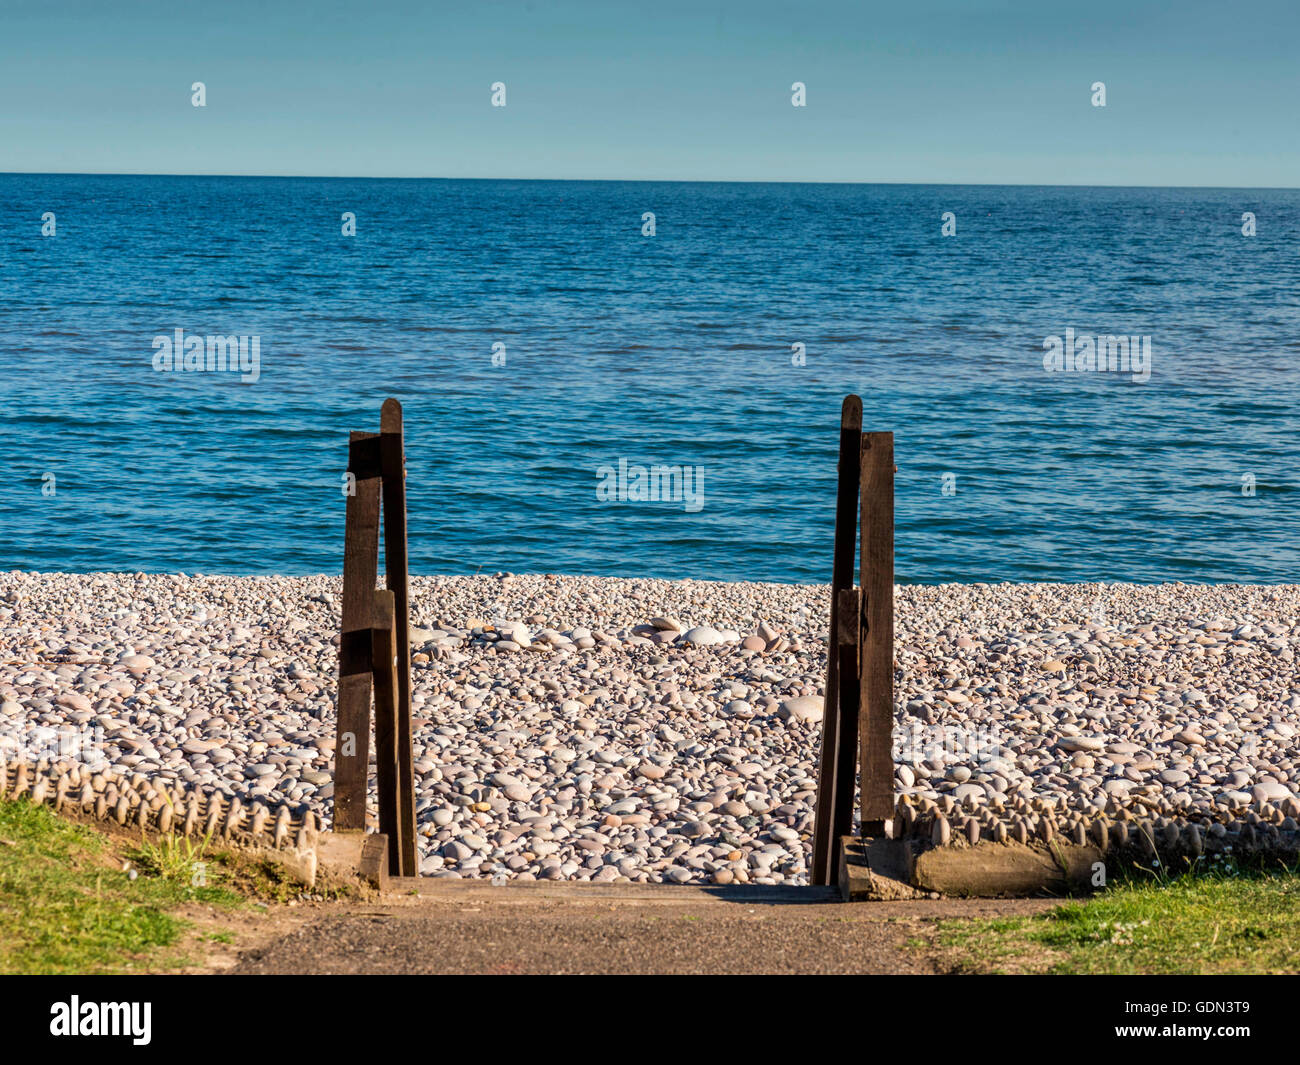 Summer seaside scene depicting pebble beach with wooden access gateway with blue ocean and sky backdrop. Stock Photo